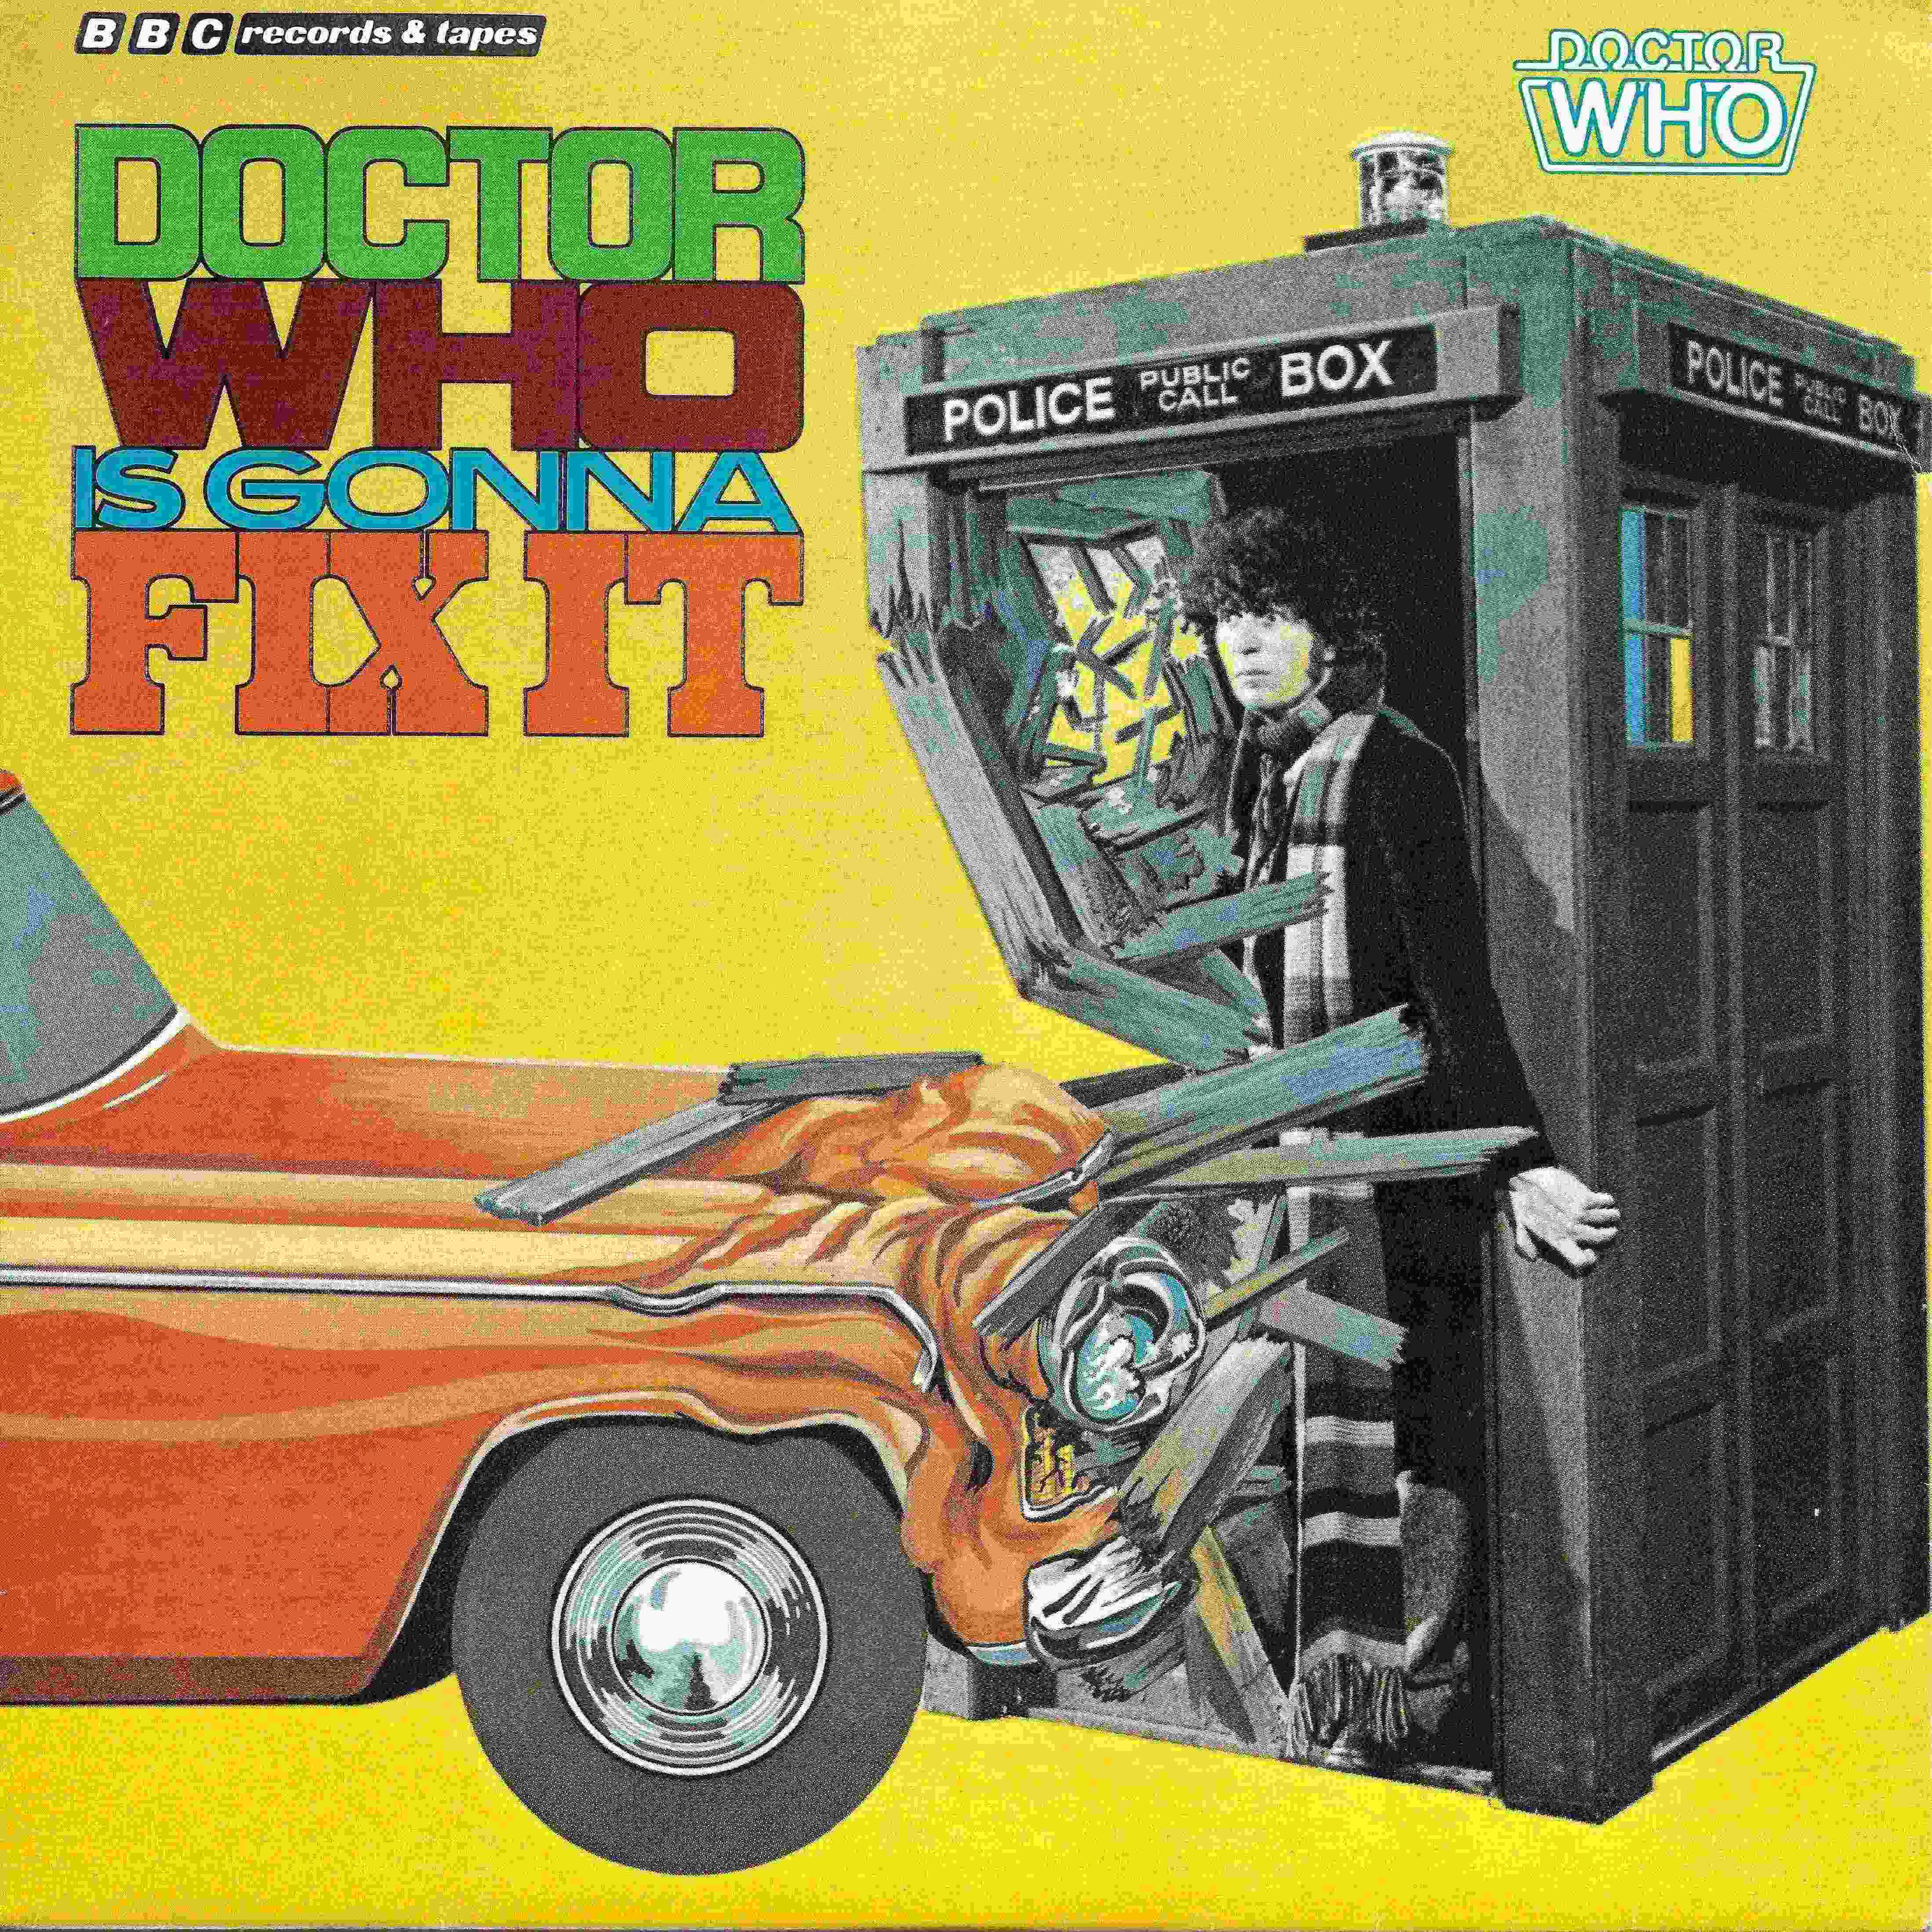 Picture of BBC - 454 Doctor who is gonna fix it (US import) by artist Bullamakanka from the BBC records and Tapes library